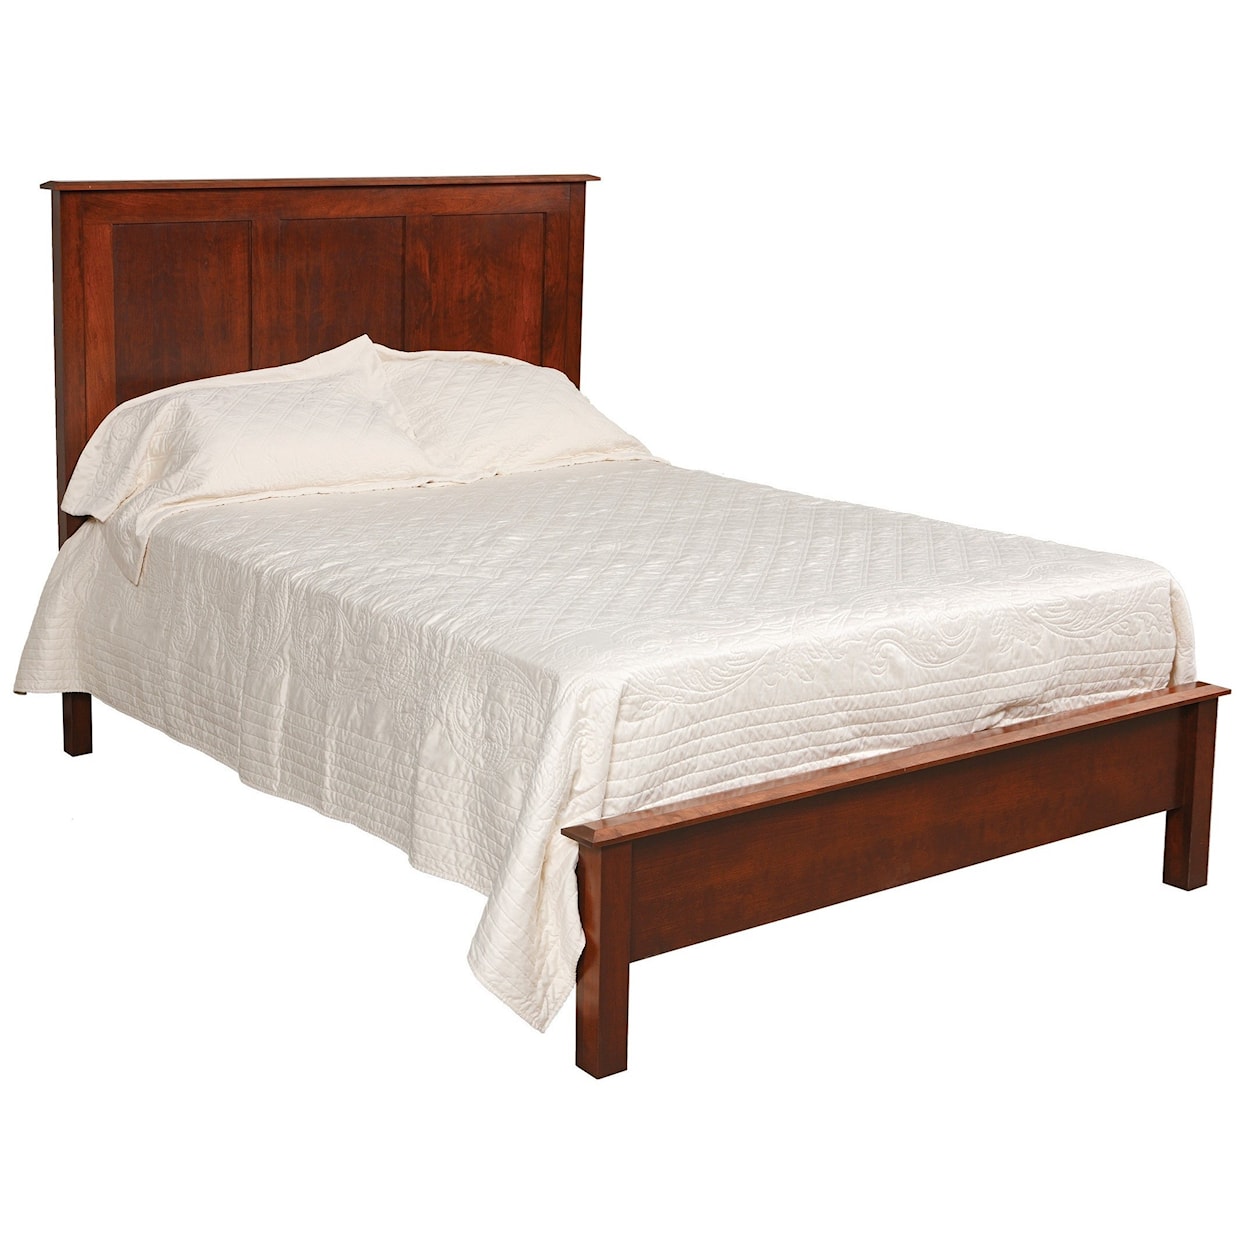 Daniel's Amish Manchester Solid Wood Full Bed